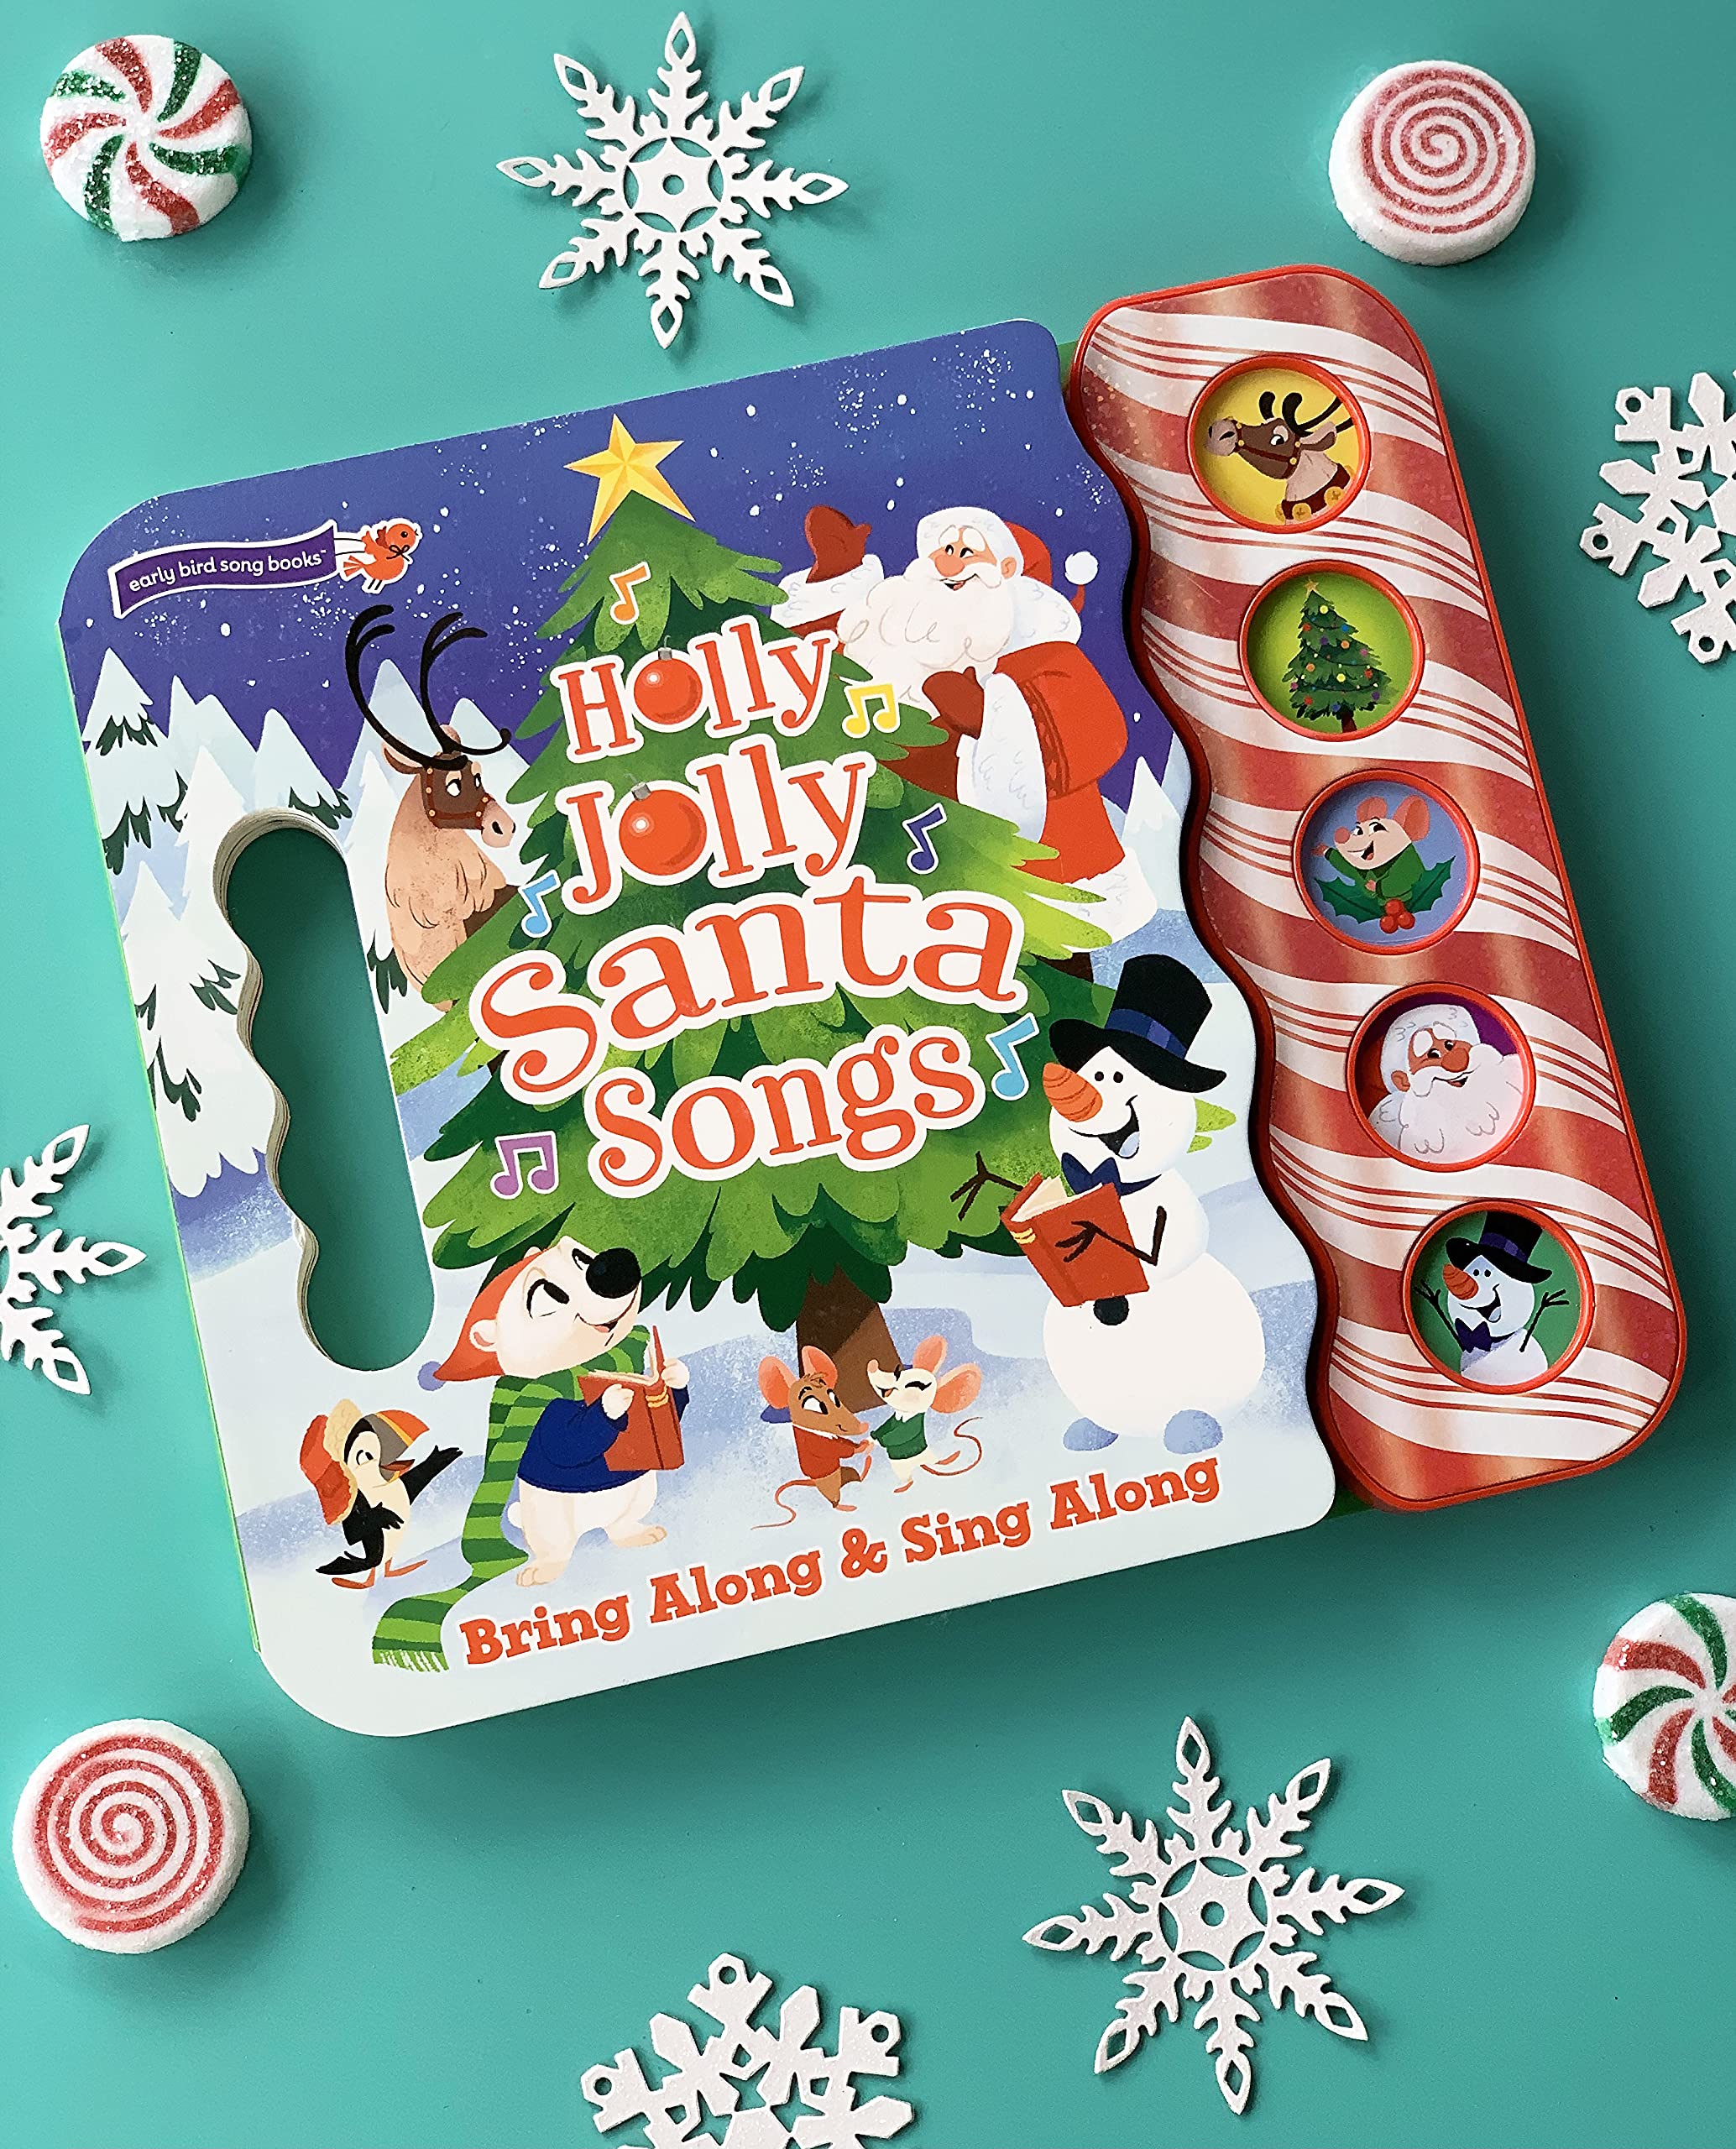 Holly Jolly Santa Songs - Children's Christmas Book with Fun and Festive Sounds for Kids 2-5 (Early Bird Song Book)